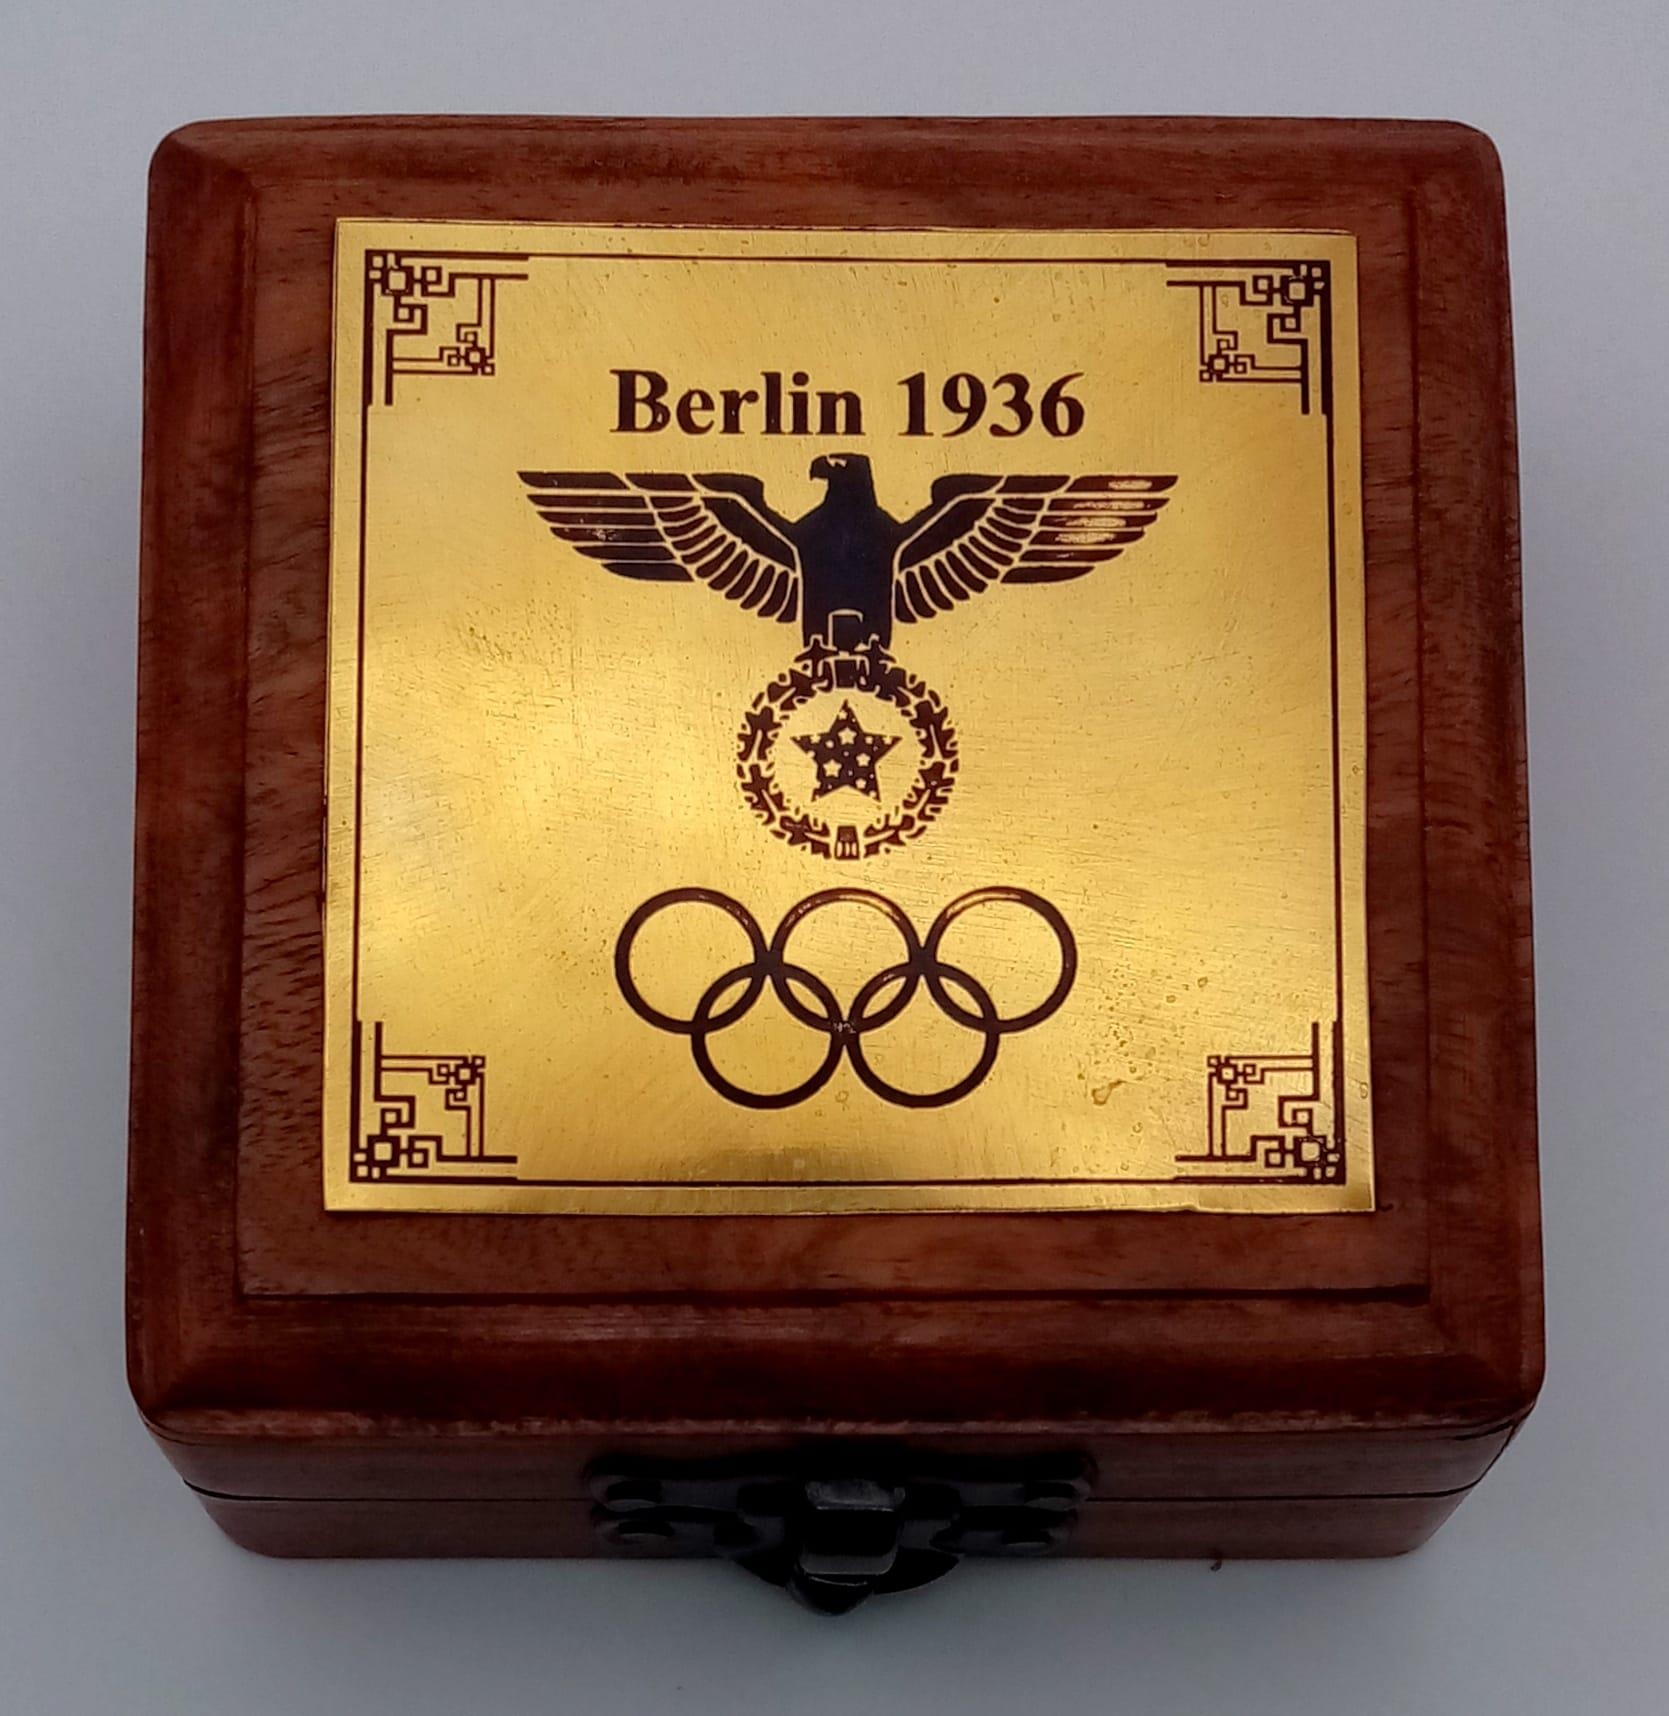 A brass compass with immobiliser, brass chain and inscription BERLIN 1936 in a wooden box with - Image 6 of 6